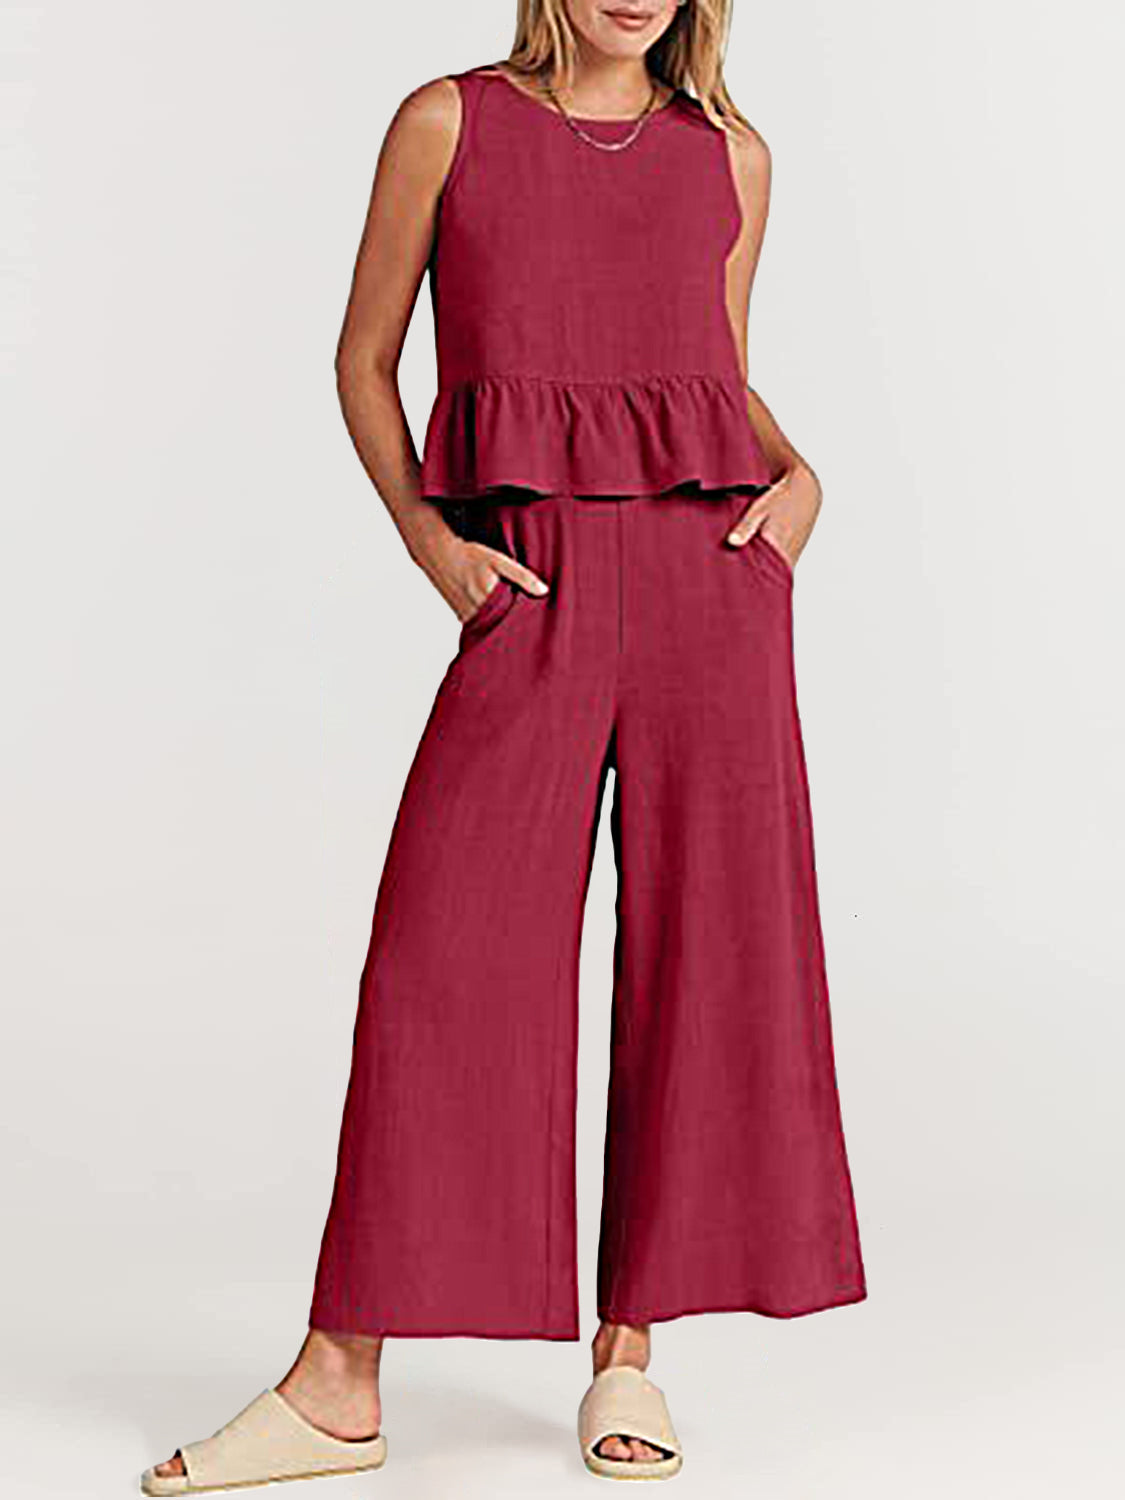 NTG Fad Two Pieces Sets Red / S(4-6) Two Piece Outfits Sleeveless Top and Wide Leg Pants Lounge Set